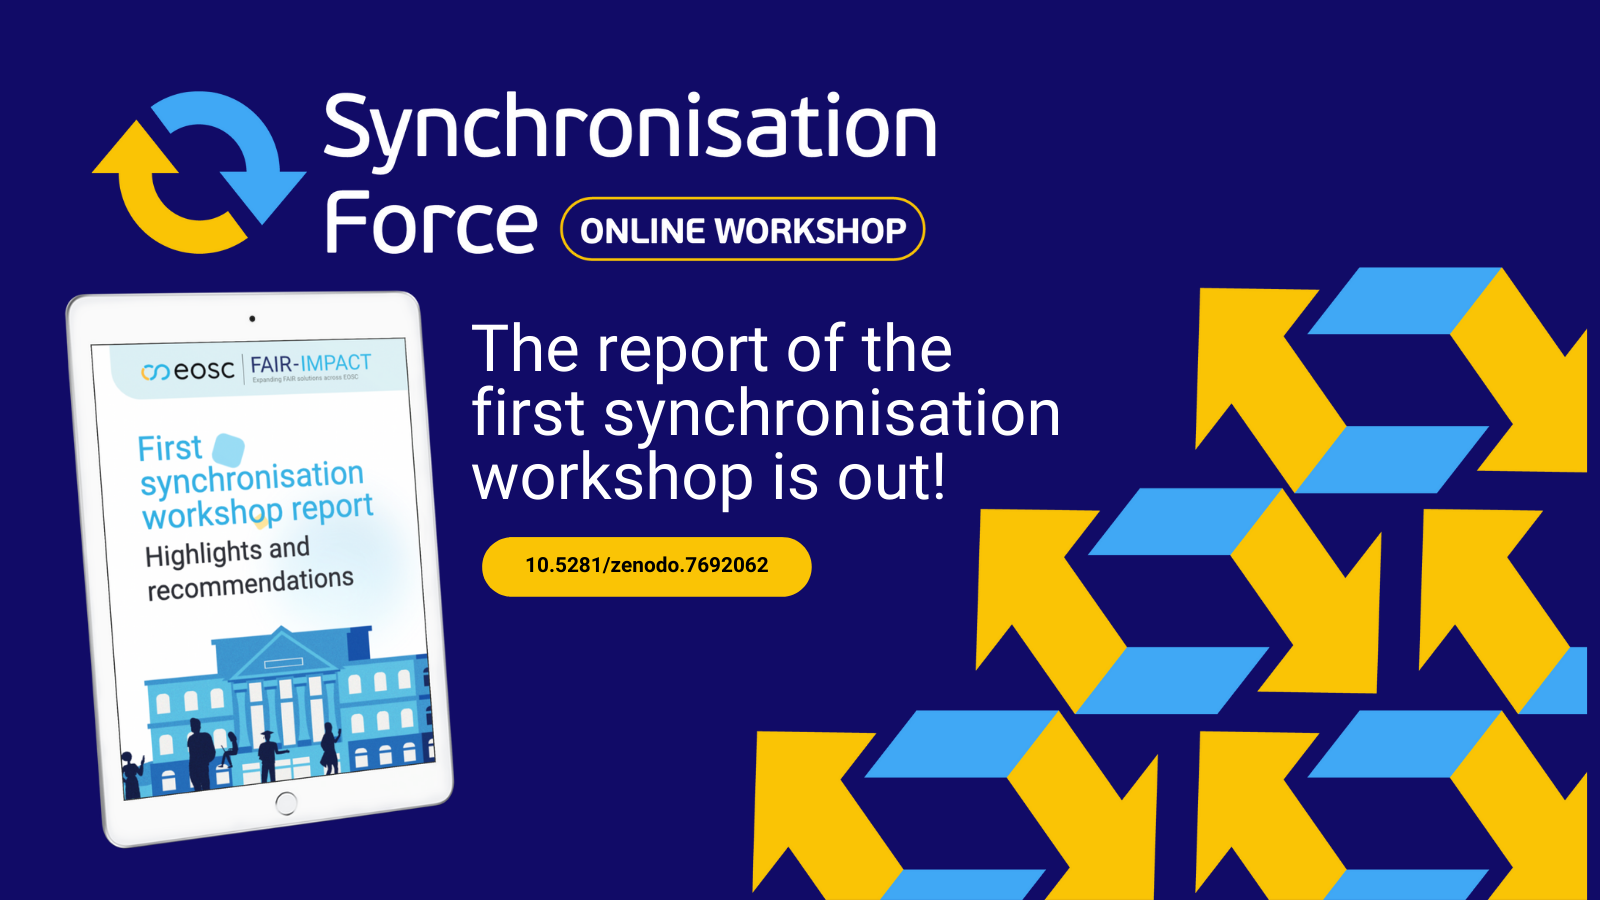 The report of the first synchronisation workshop is out!